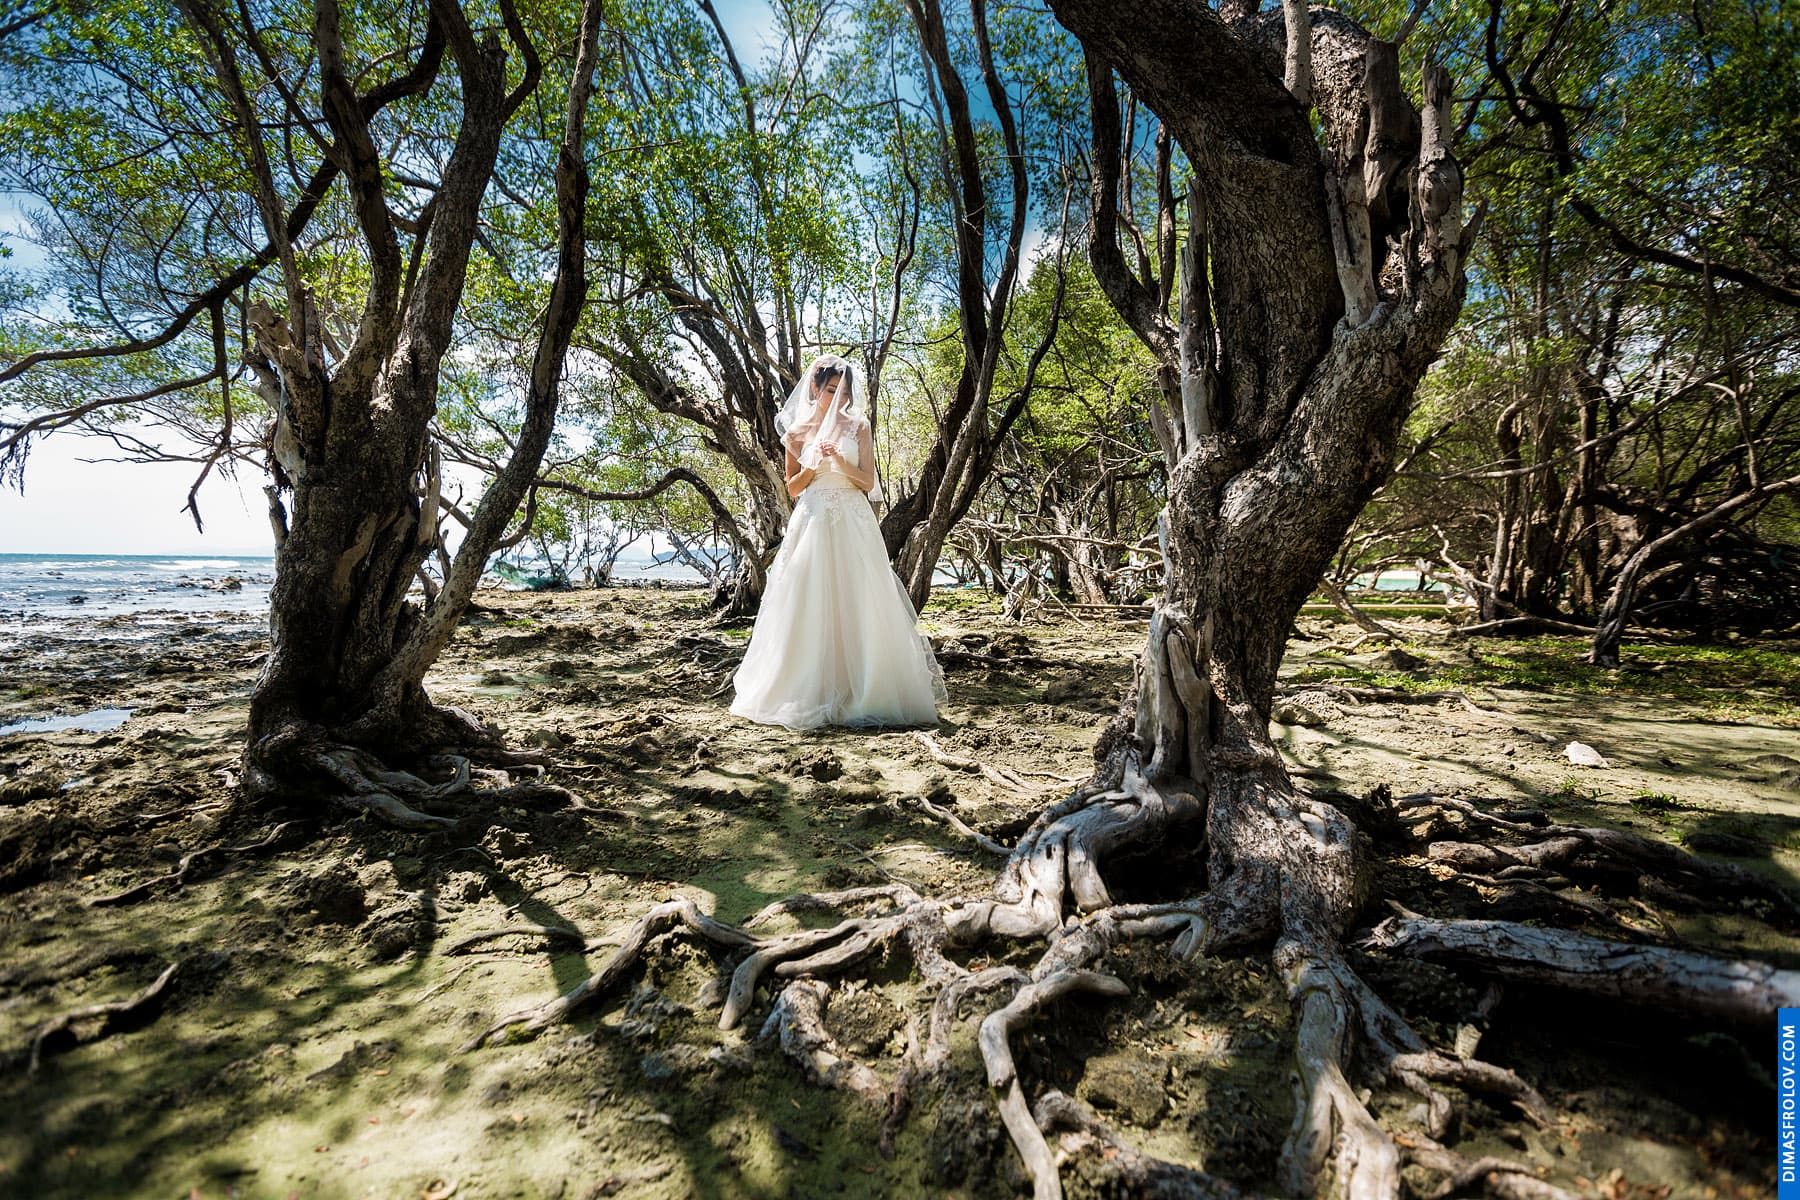 Samui shooting location: Dry forest with twisted roots. photographer Dimas Frolov. photo1416